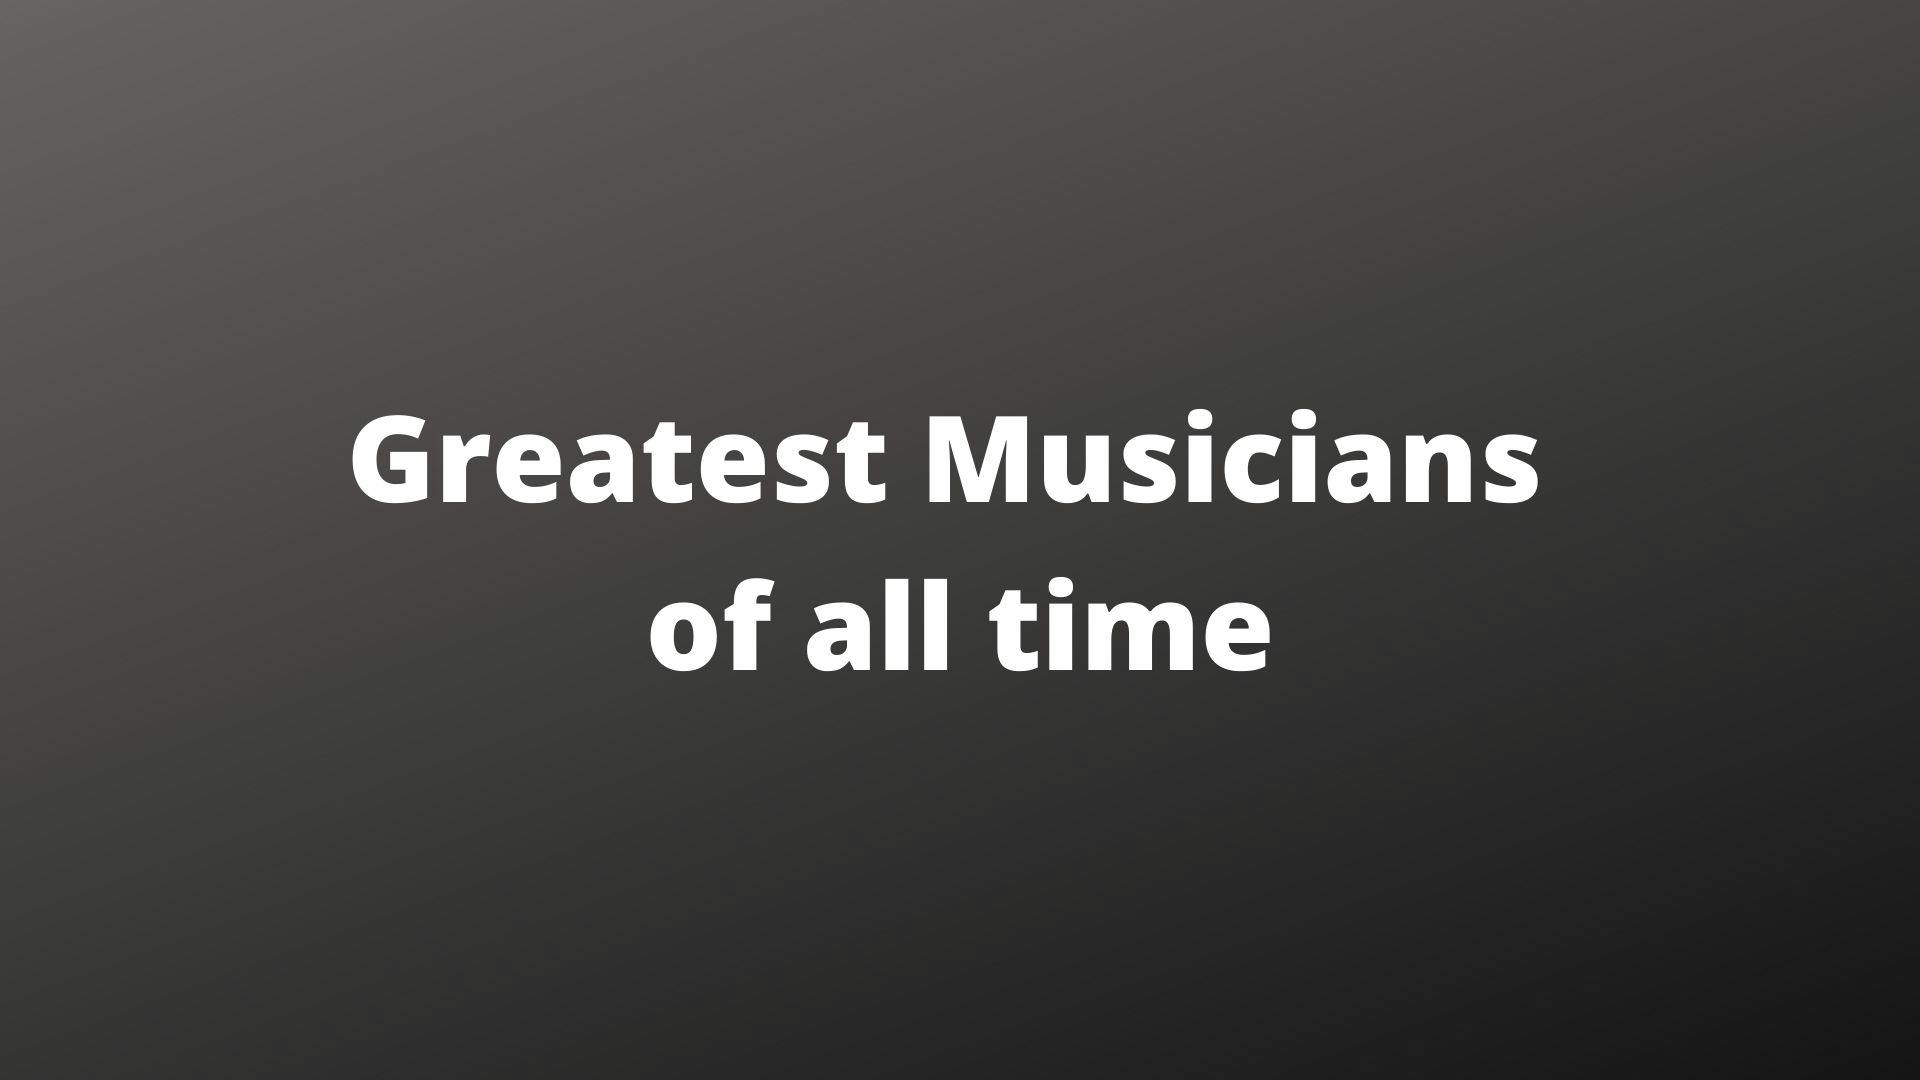 The Top 5 Greatest Musicians of All Time